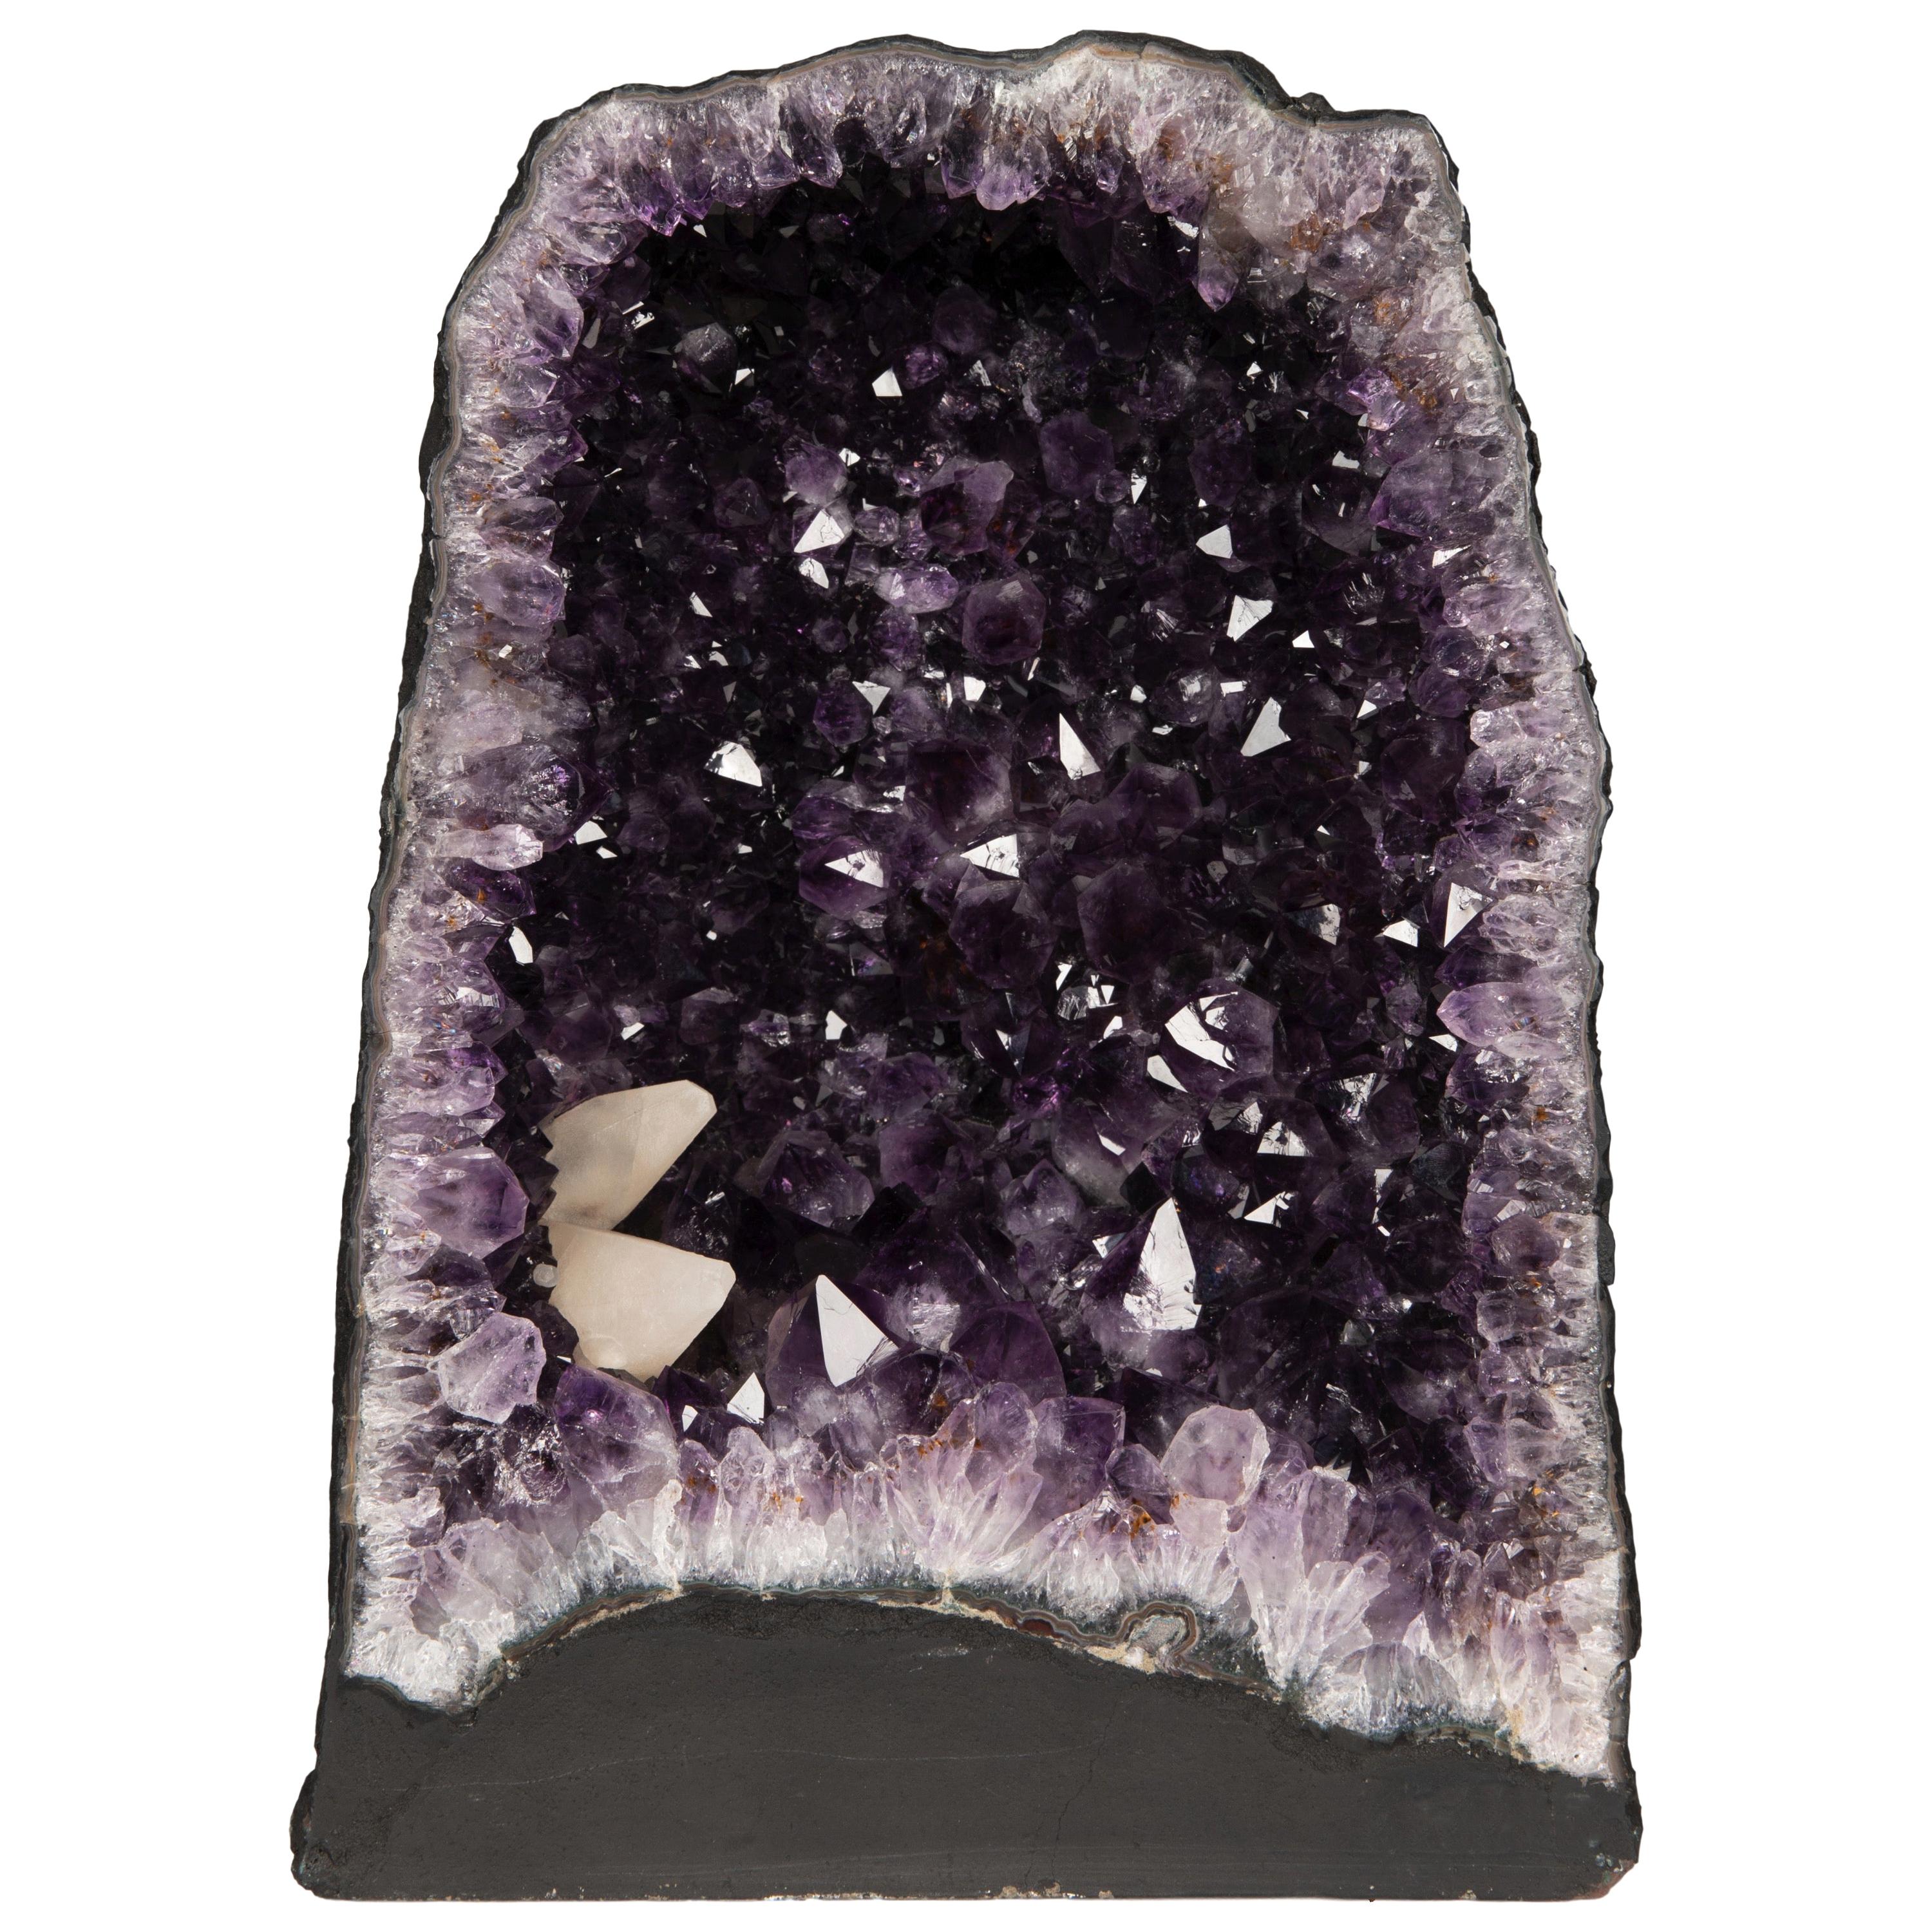 Purple Half Geode Amethyst with Calcite Formations Shaped as Cathedral or Chapel For Sale